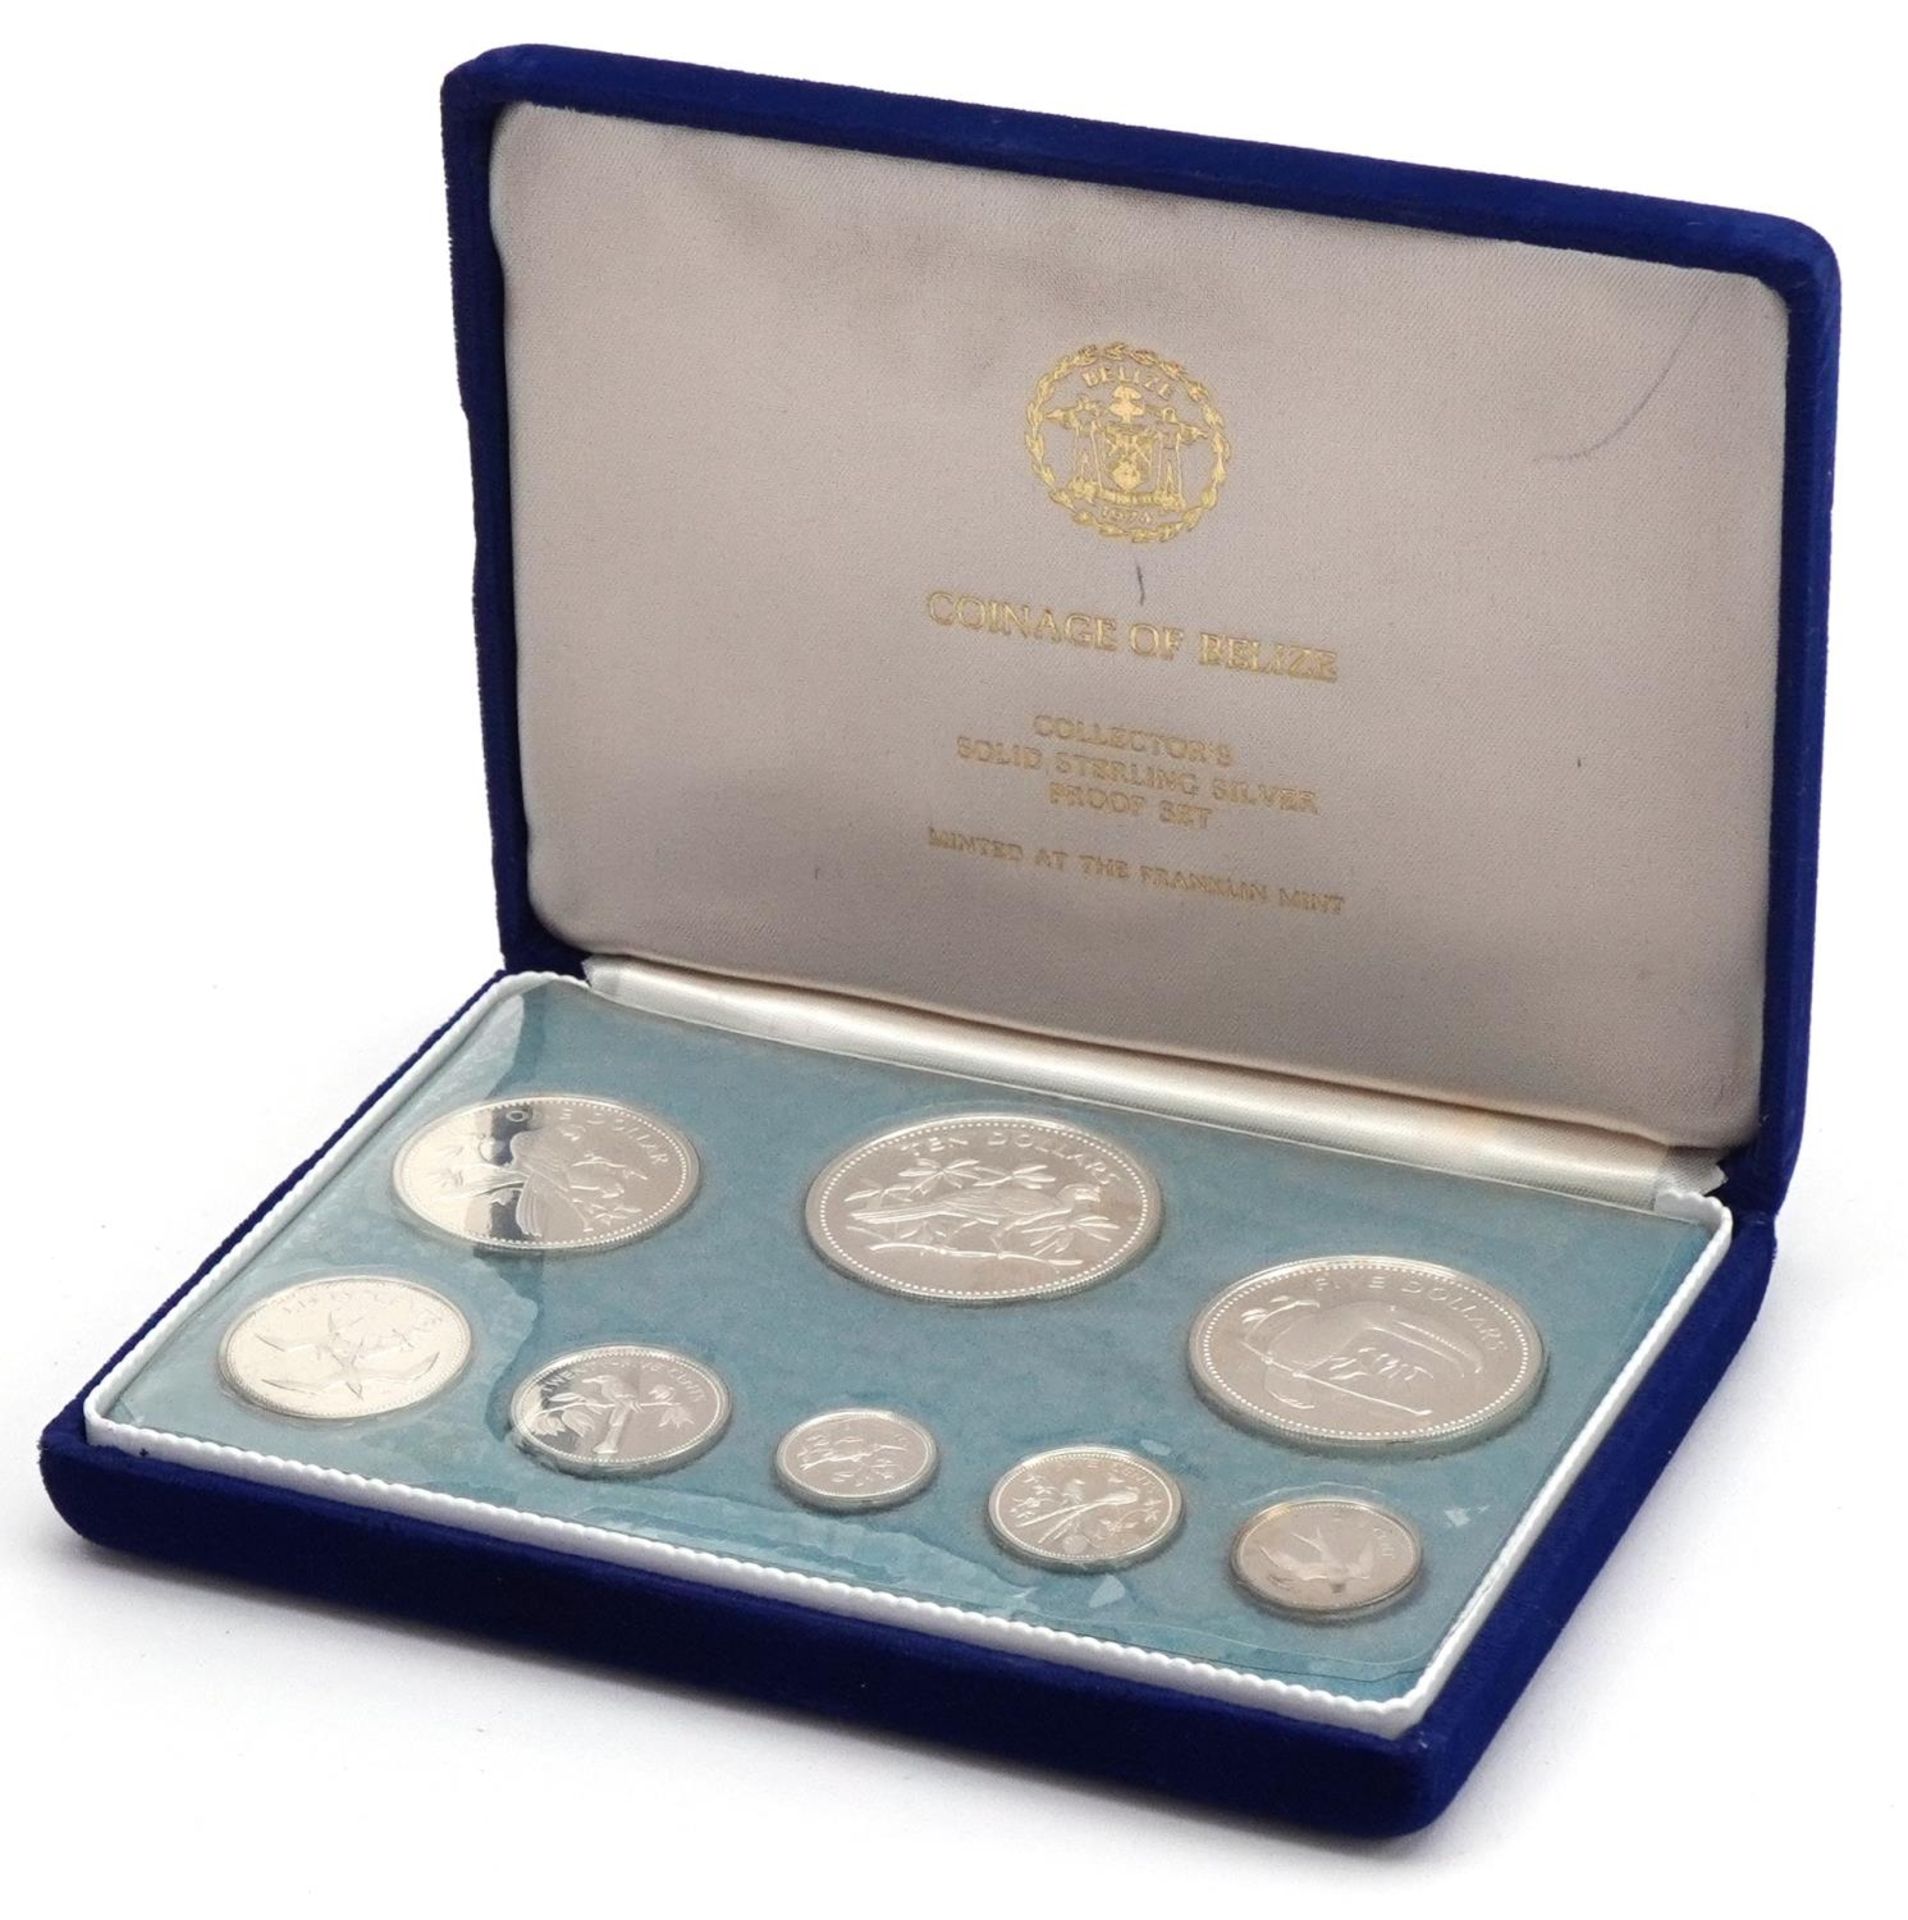 1974 Coinage of Belize silver proof eight coin set minted at The Franklin Mint, housed in a silk and